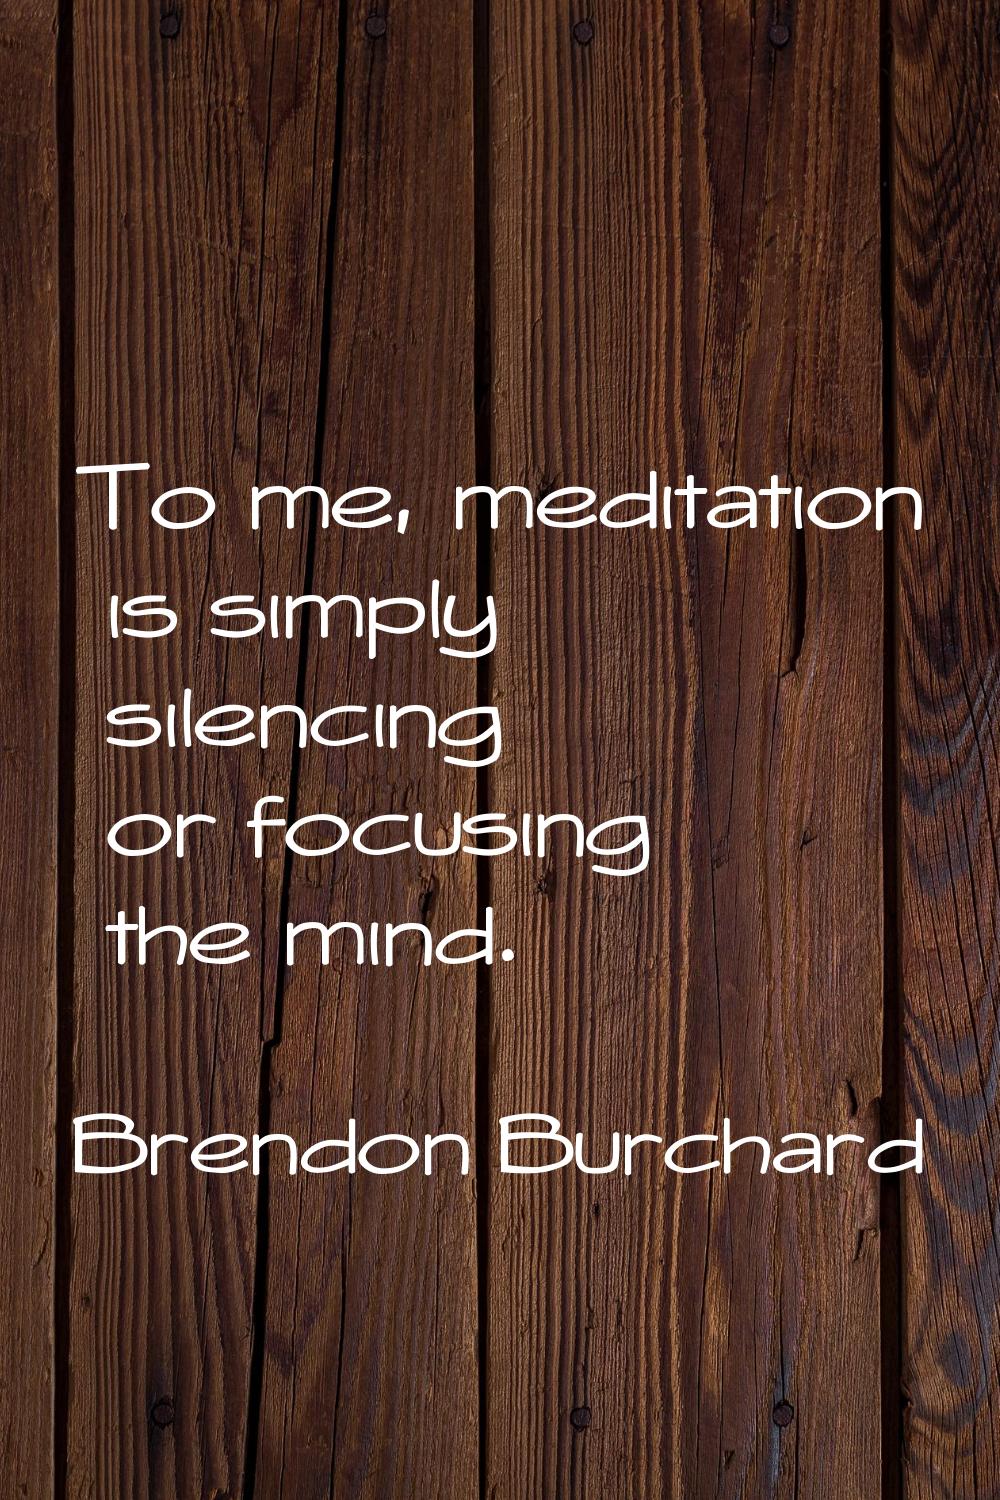 To me, meditation is simply silencing or focusing the mind.